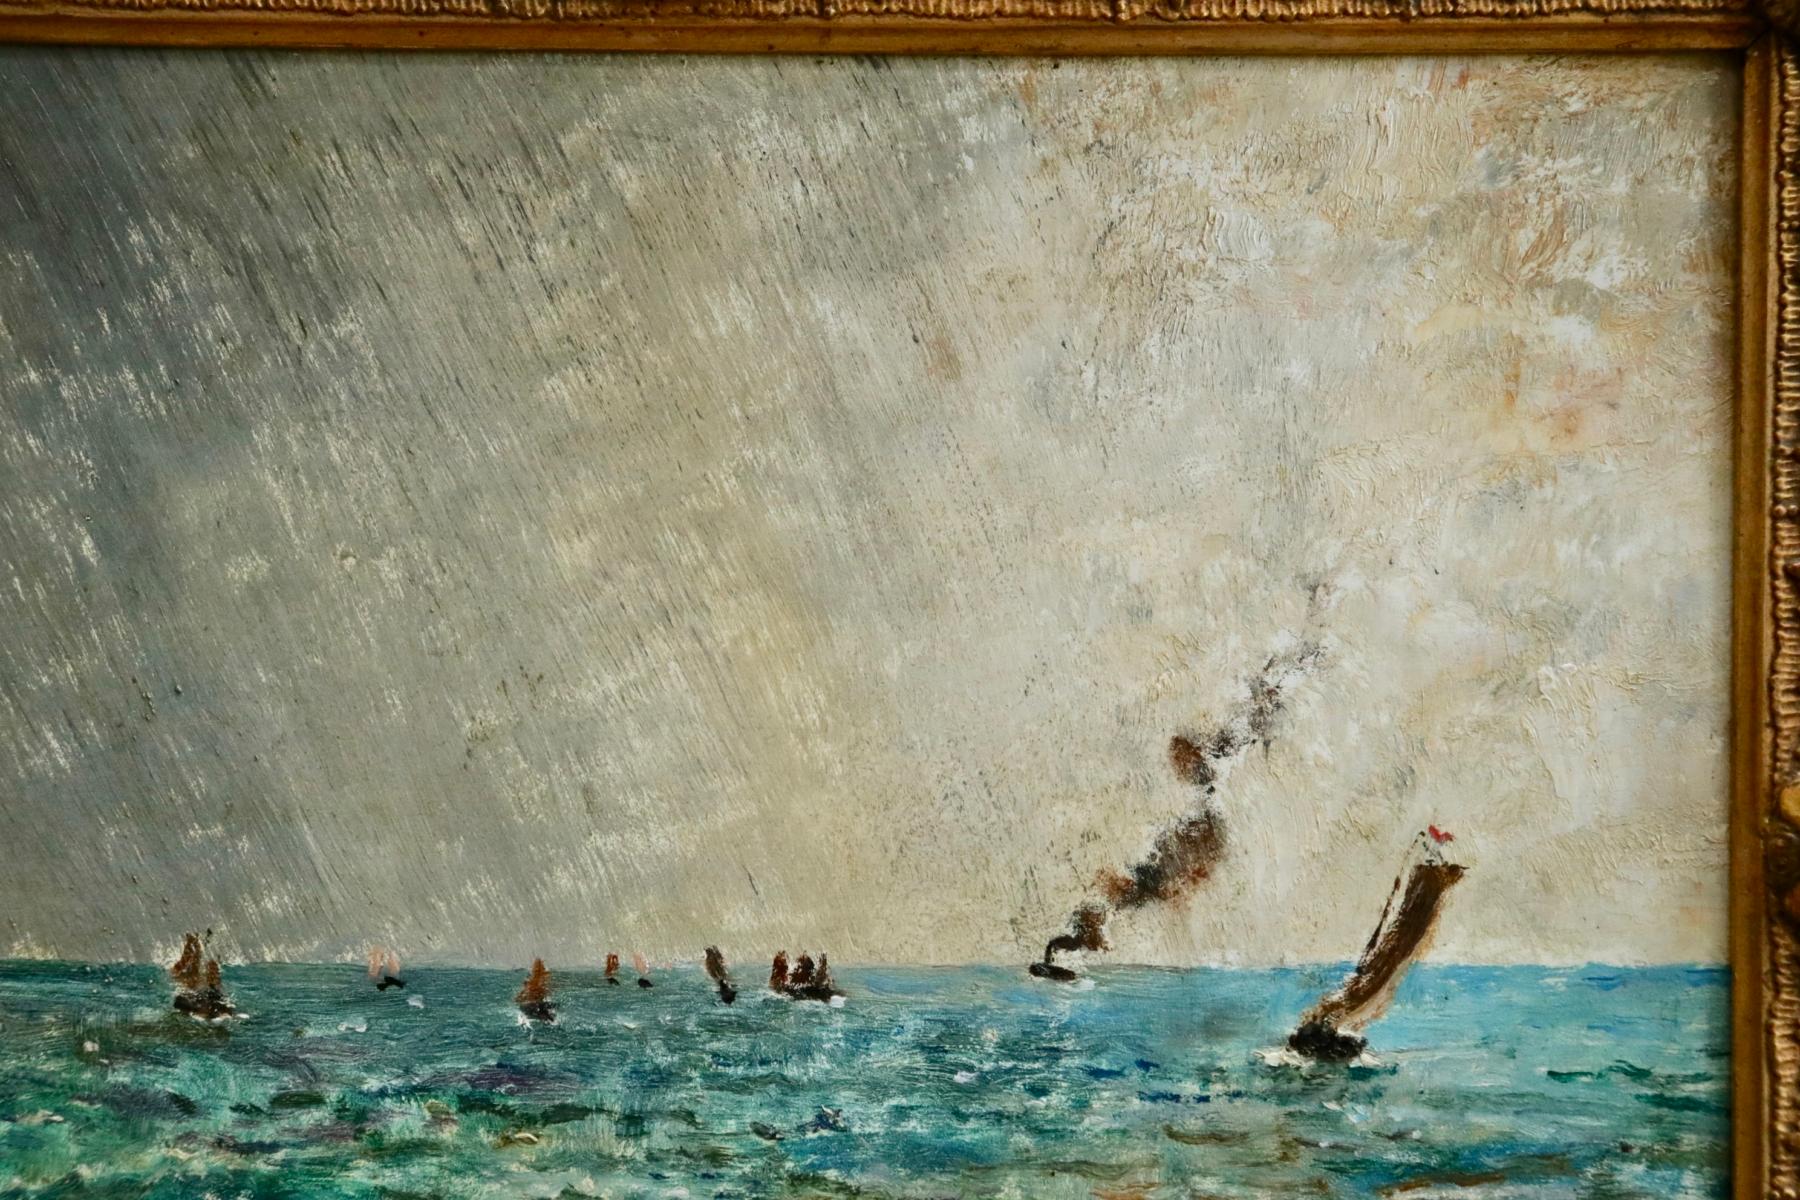 Steamers off the Coast - 19th Century Oil, Boats in Seascape by Alfred Stevens 2